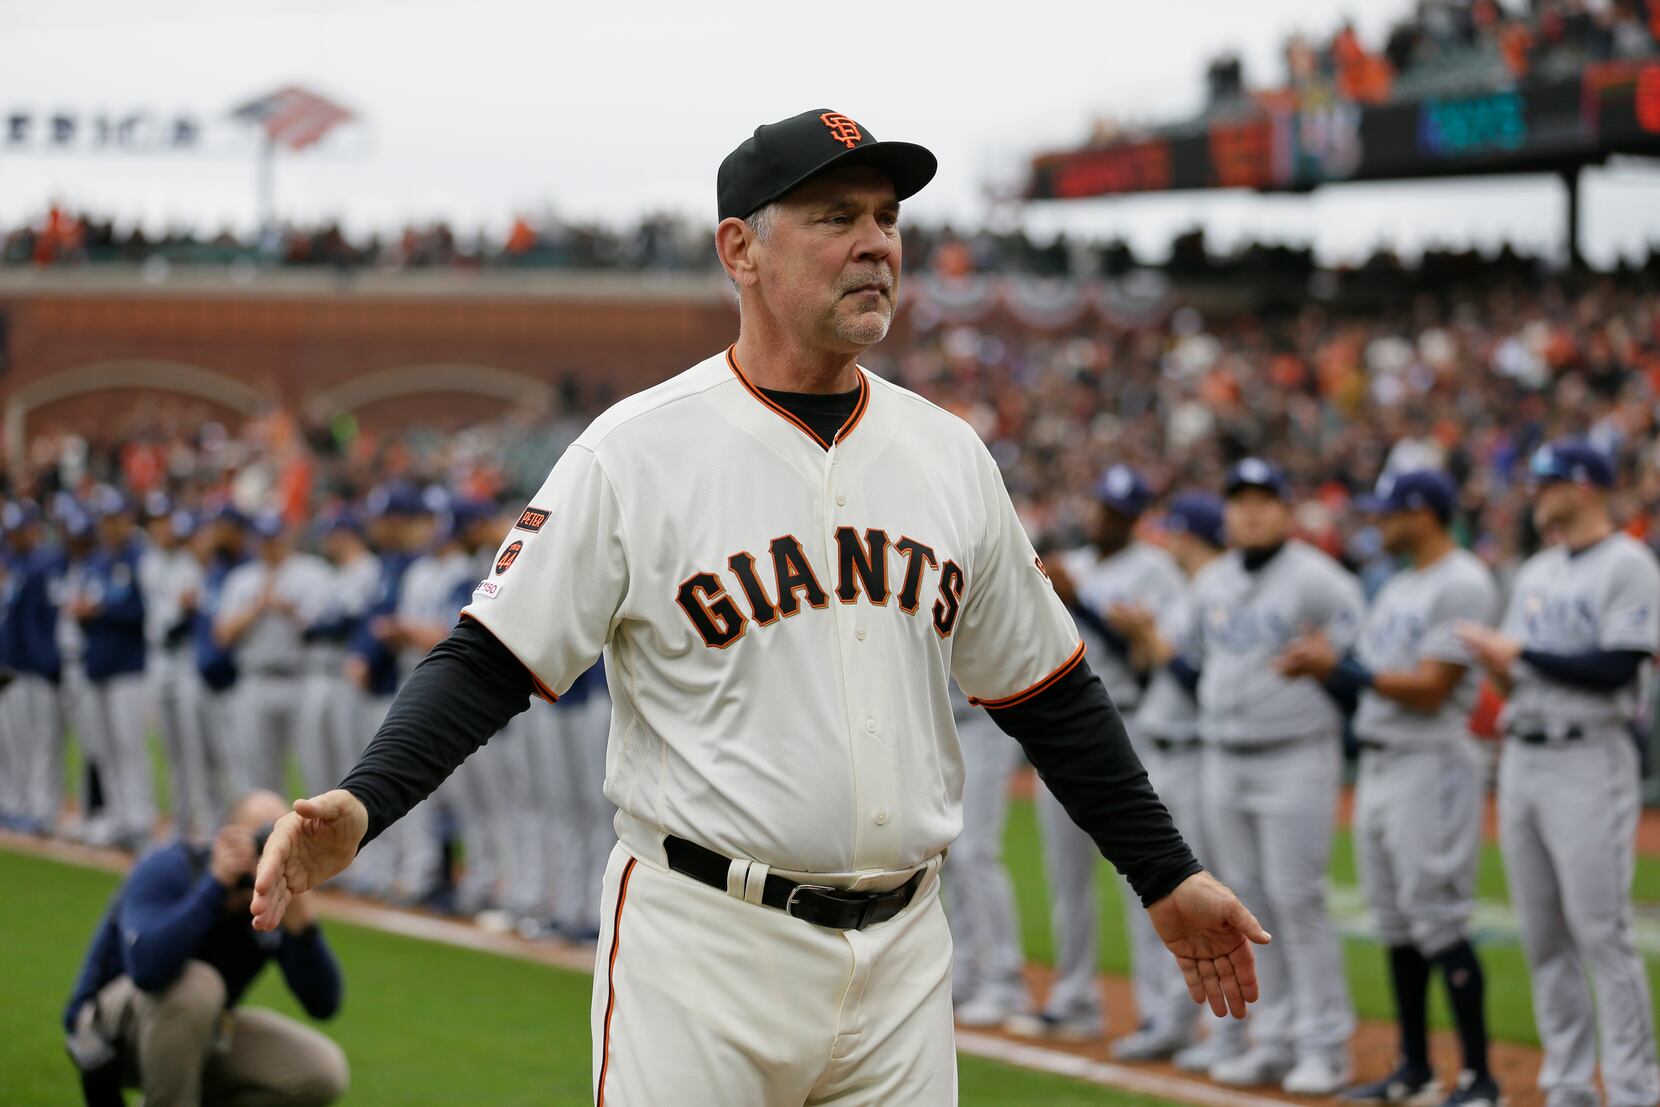 Report: SF Giants to interview Red Sox legend, coach for manager